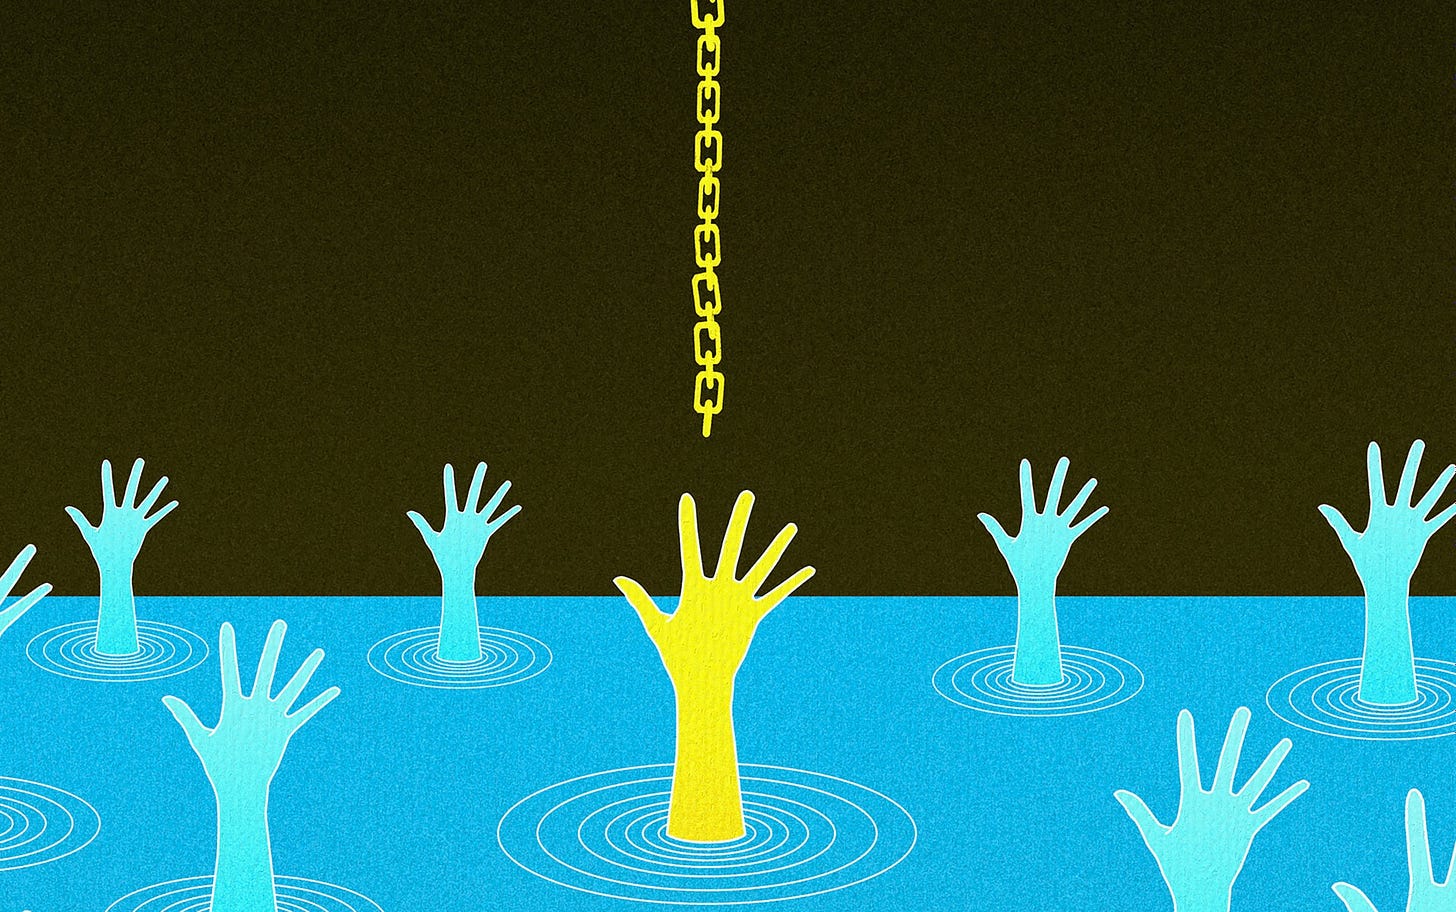 Drawing of hands reaching out of the water to grab a chain